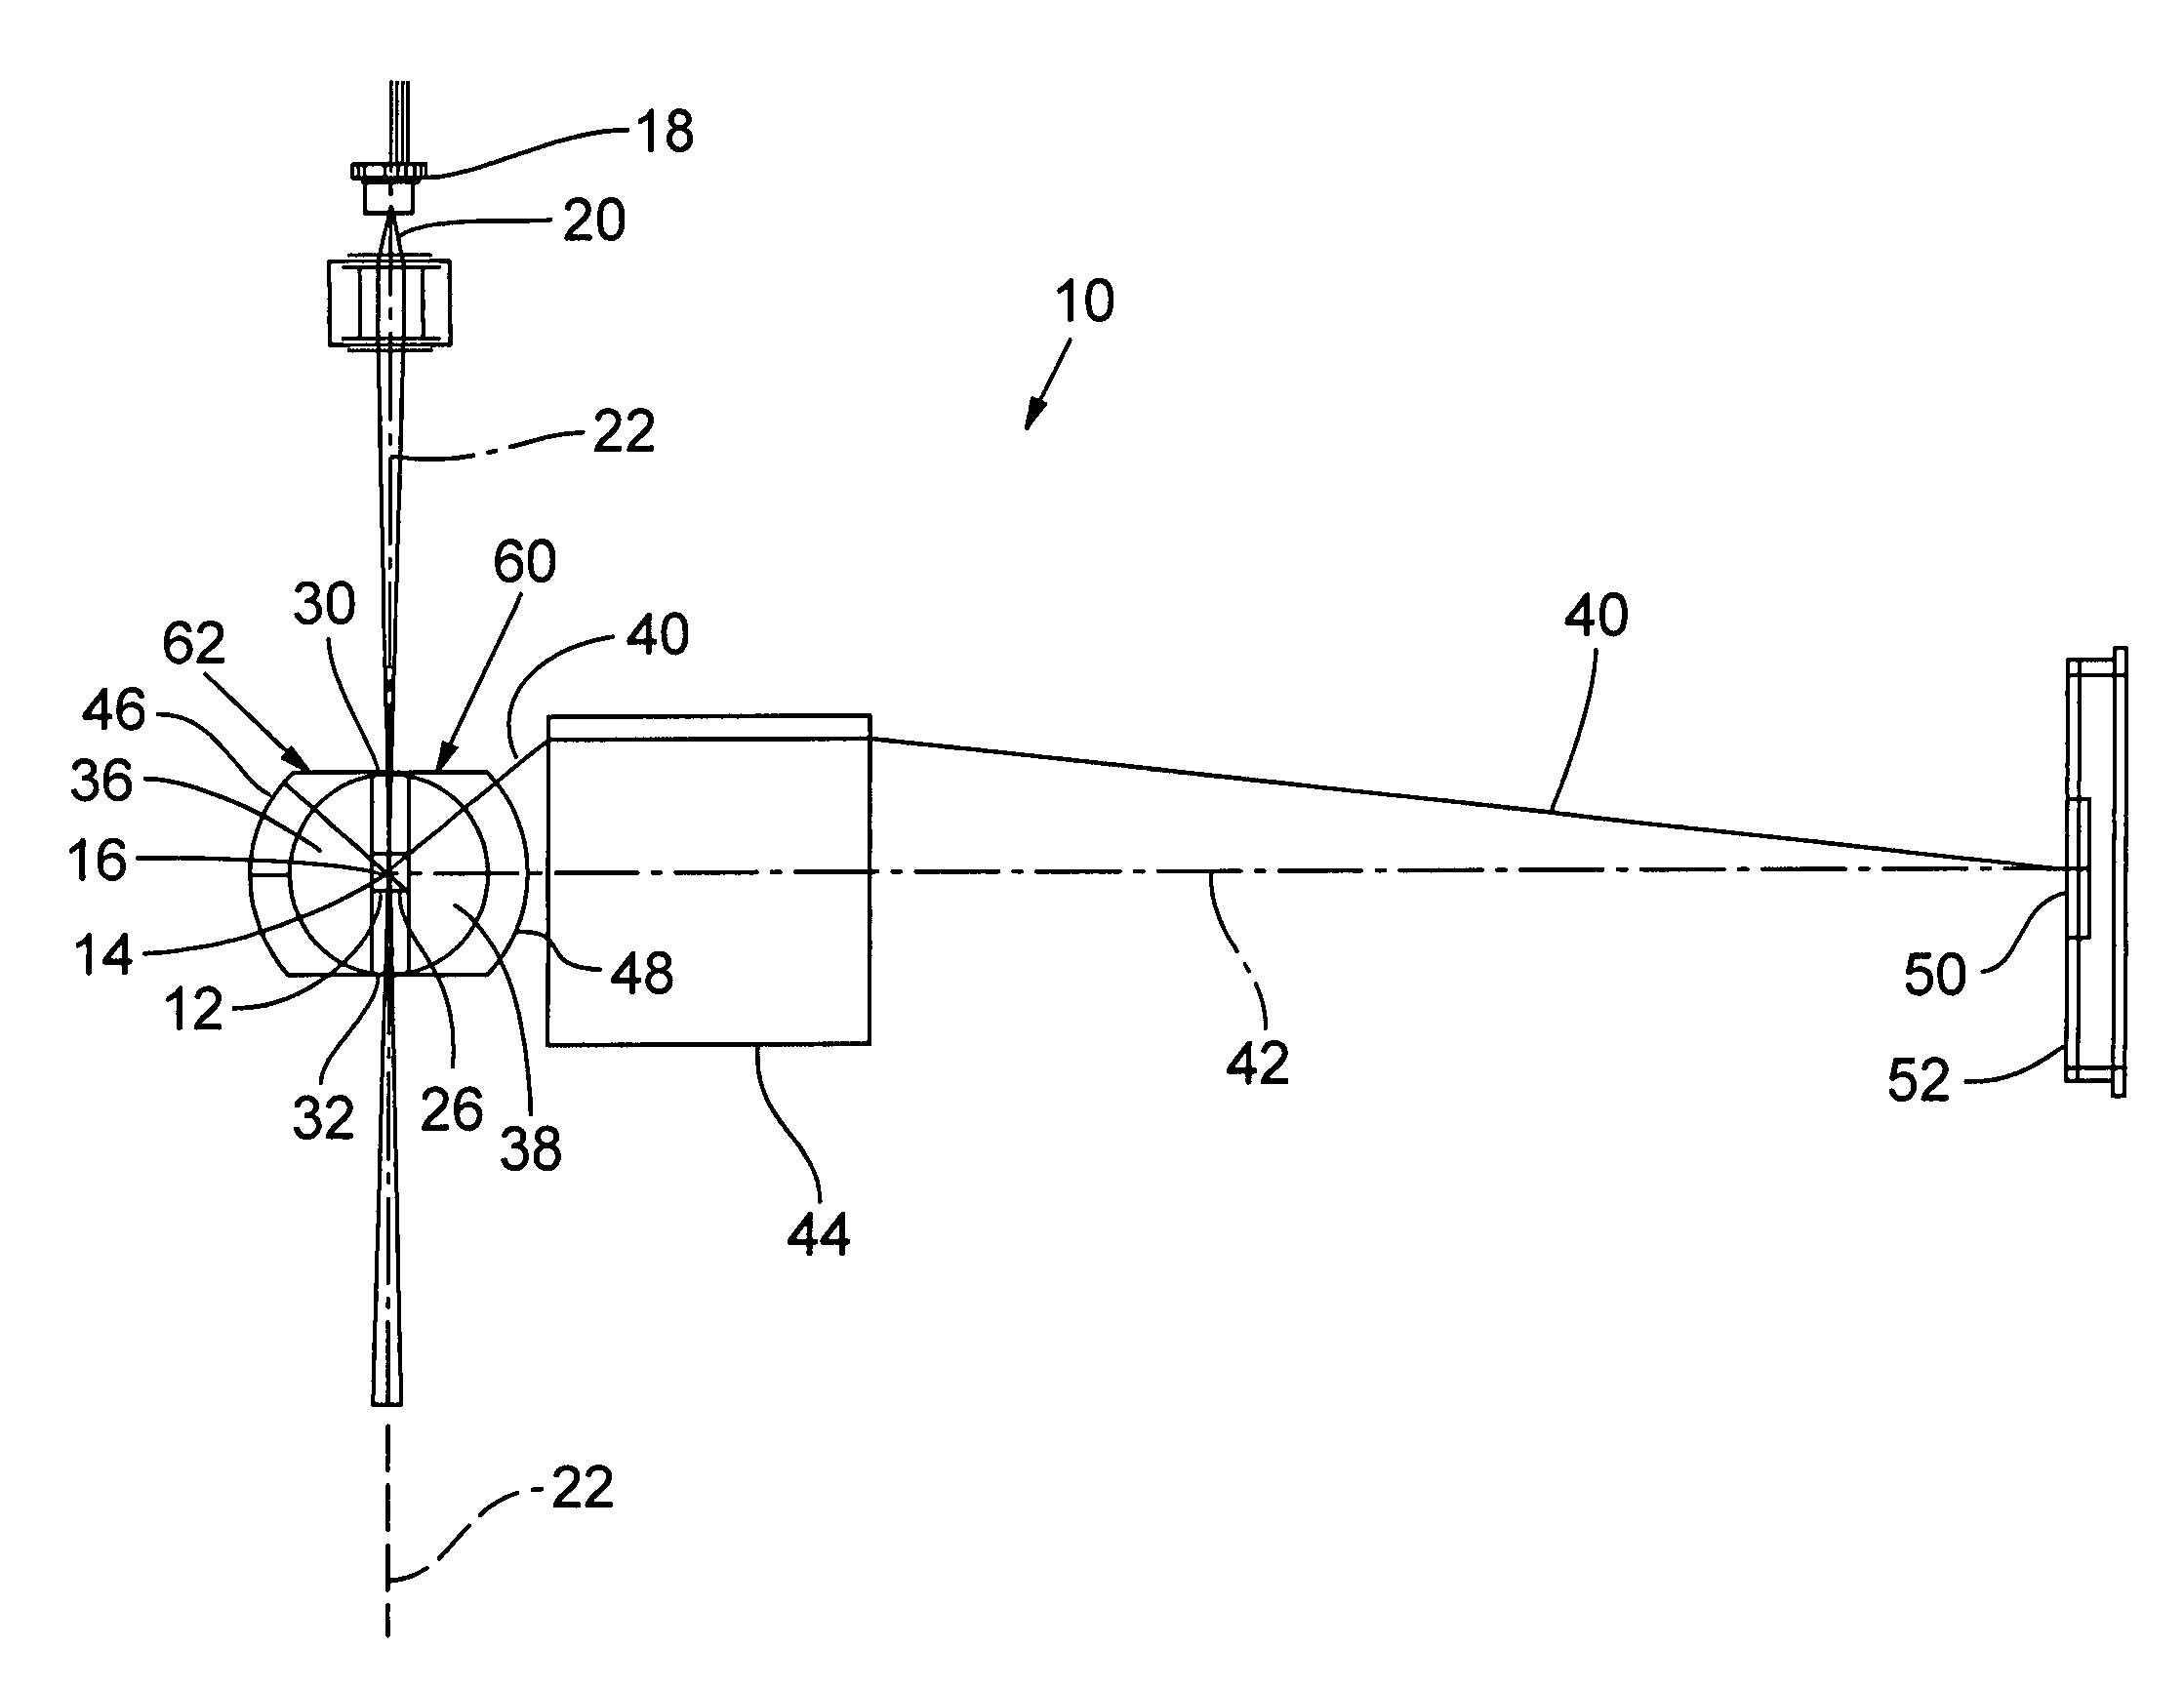 Particle detection system implemented with an immersed optical system